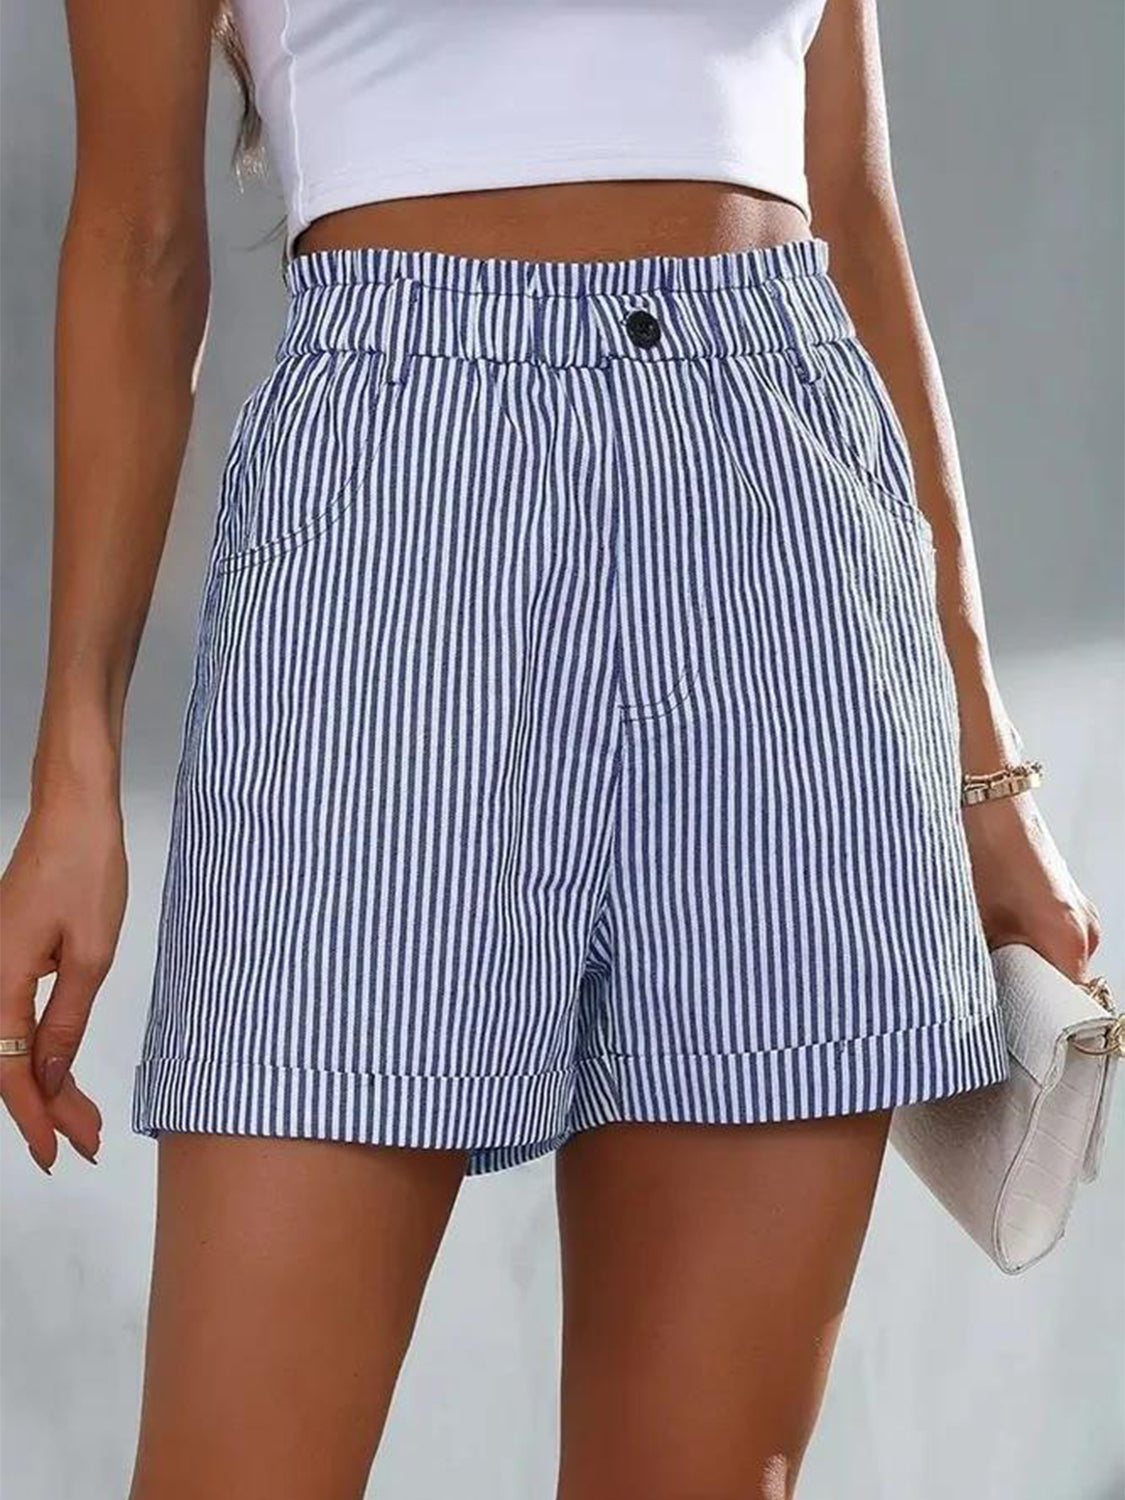 Chic striped shorts with pockets for stylish comfort. Perfect for versatile, everyday wear.